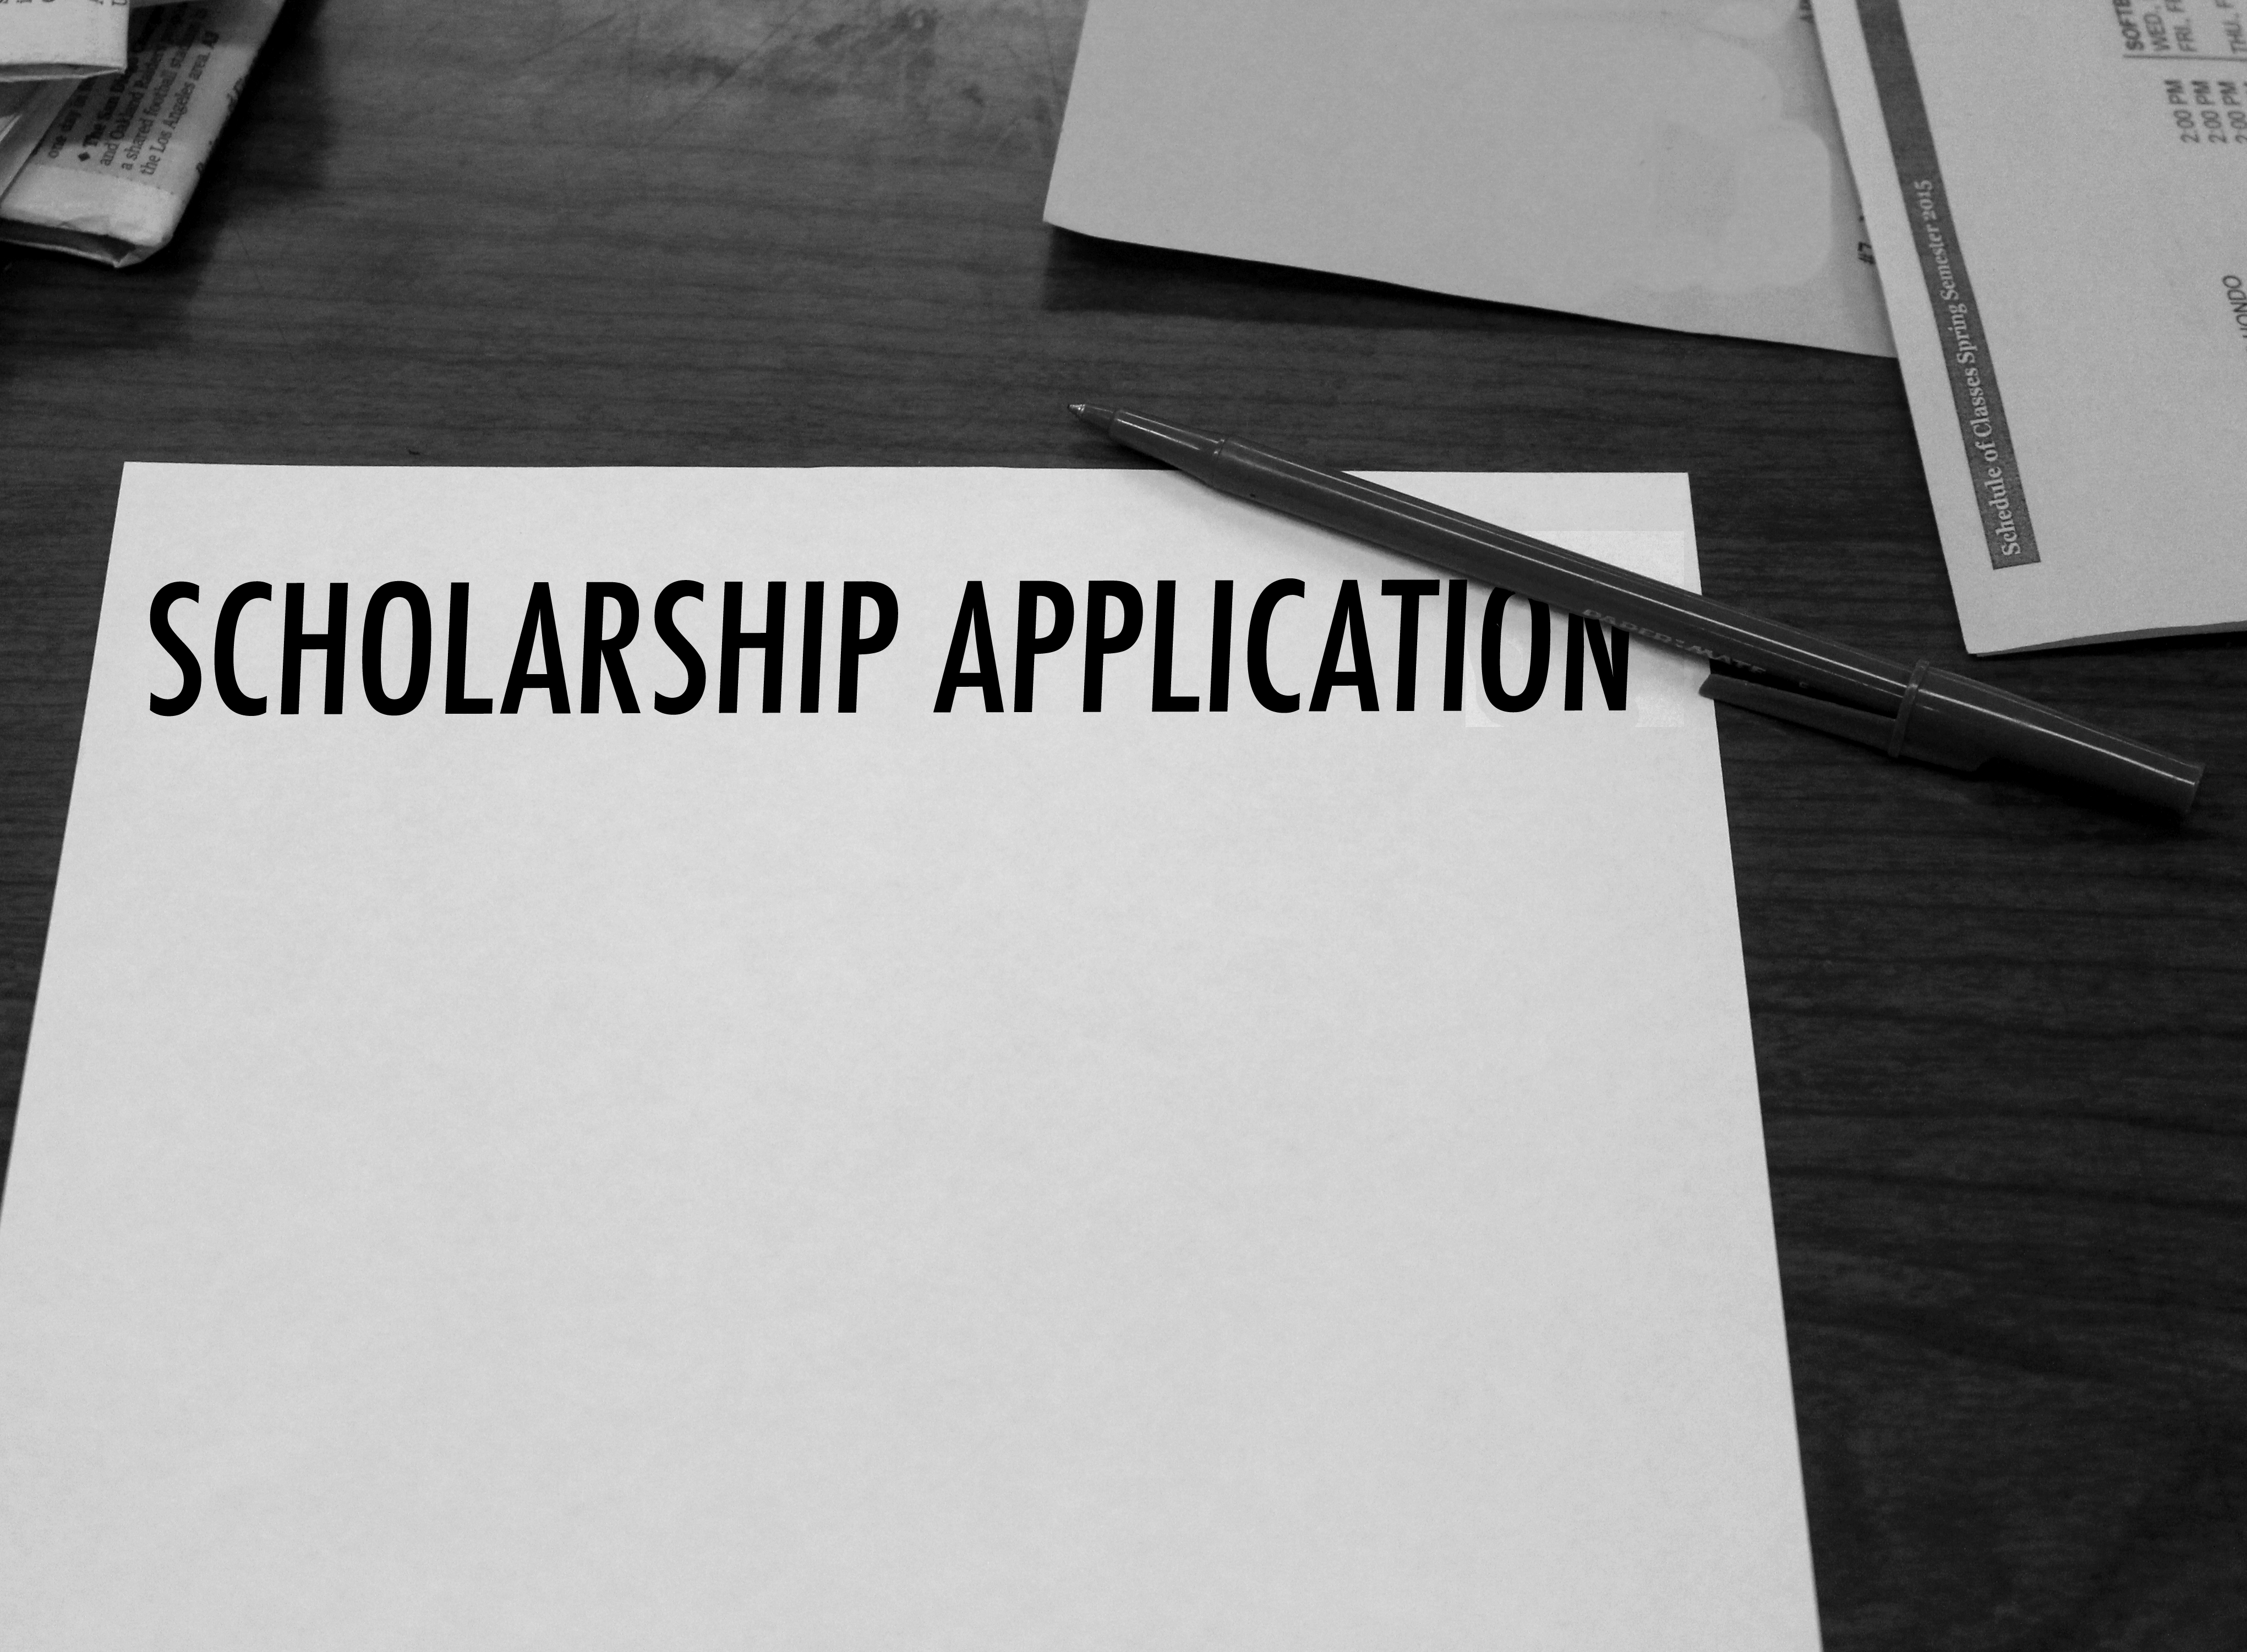 Scholarships: An untapped source